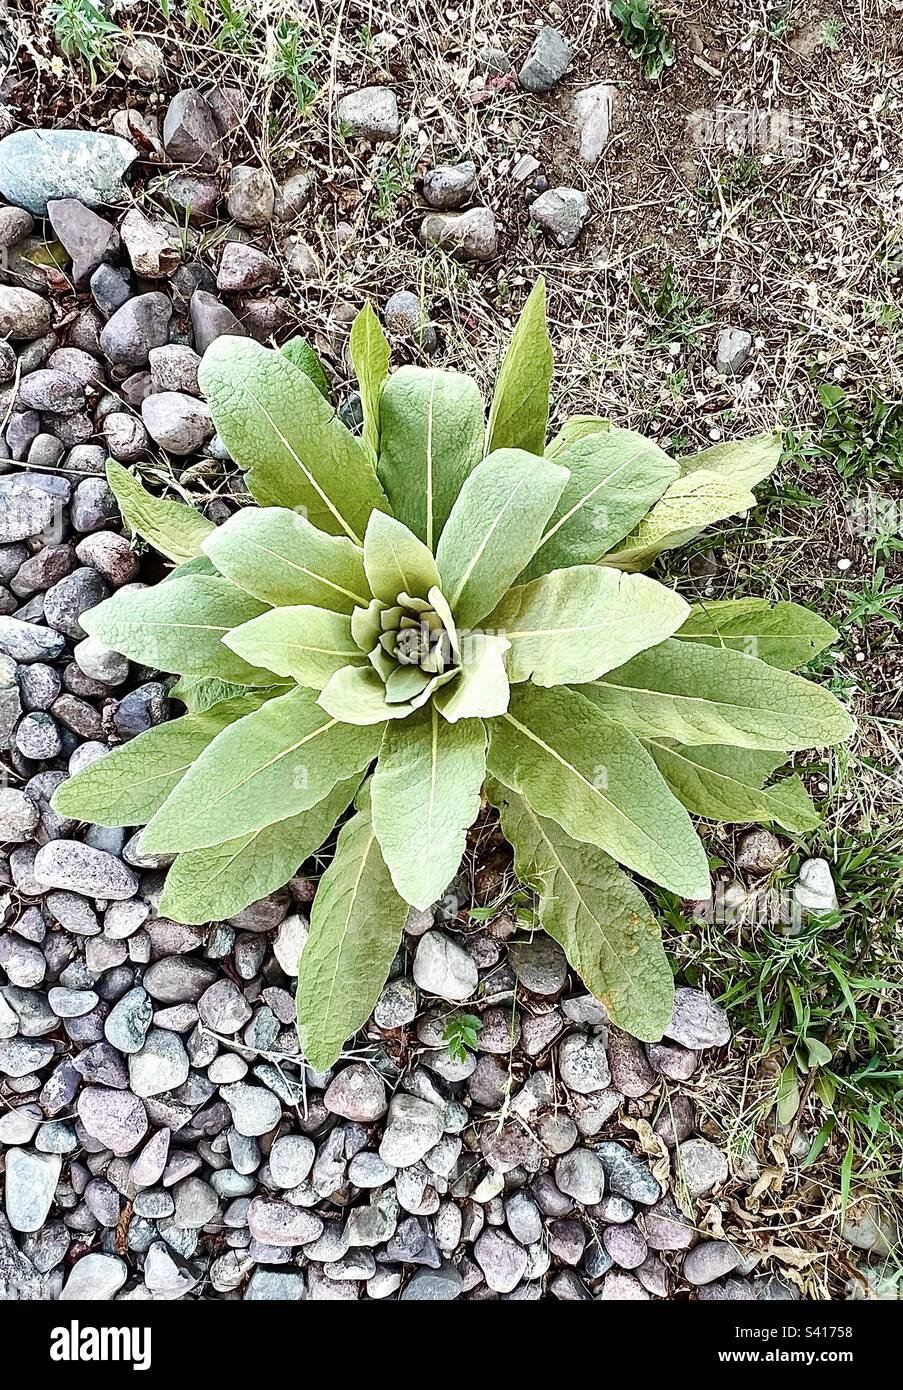 Mullein Verbascum thapsus (L.) growing on the edge of gravel and dirt Stock Photo